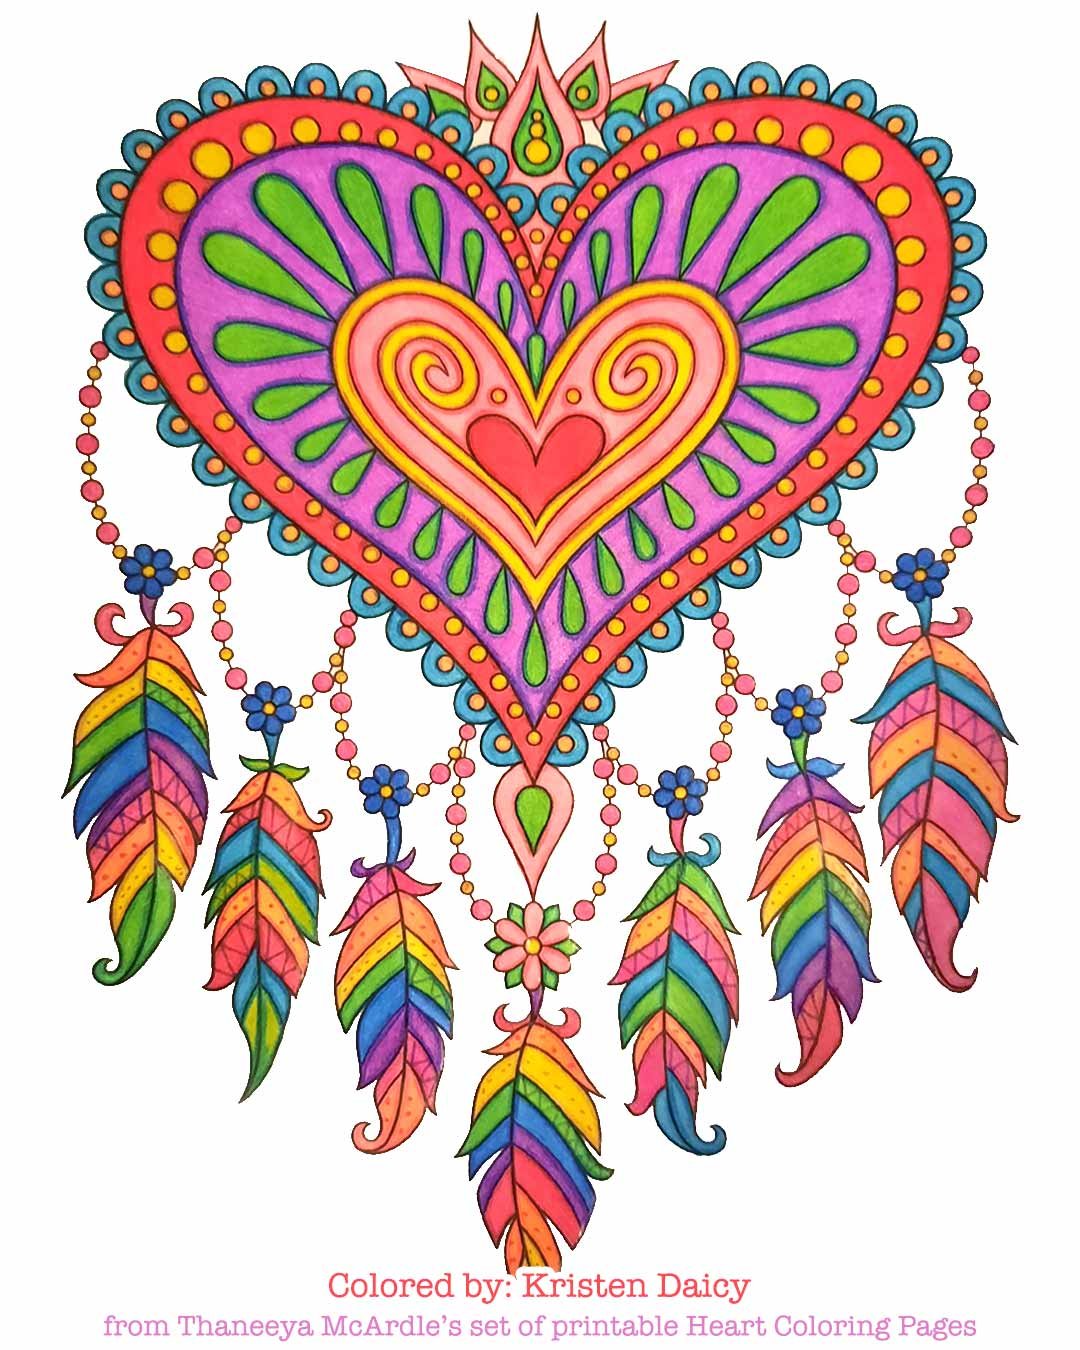 Heart Dreamcatcher Coloring Page from Thaneeya McArdle's Set of 10 Printable Heart Coloring Pages